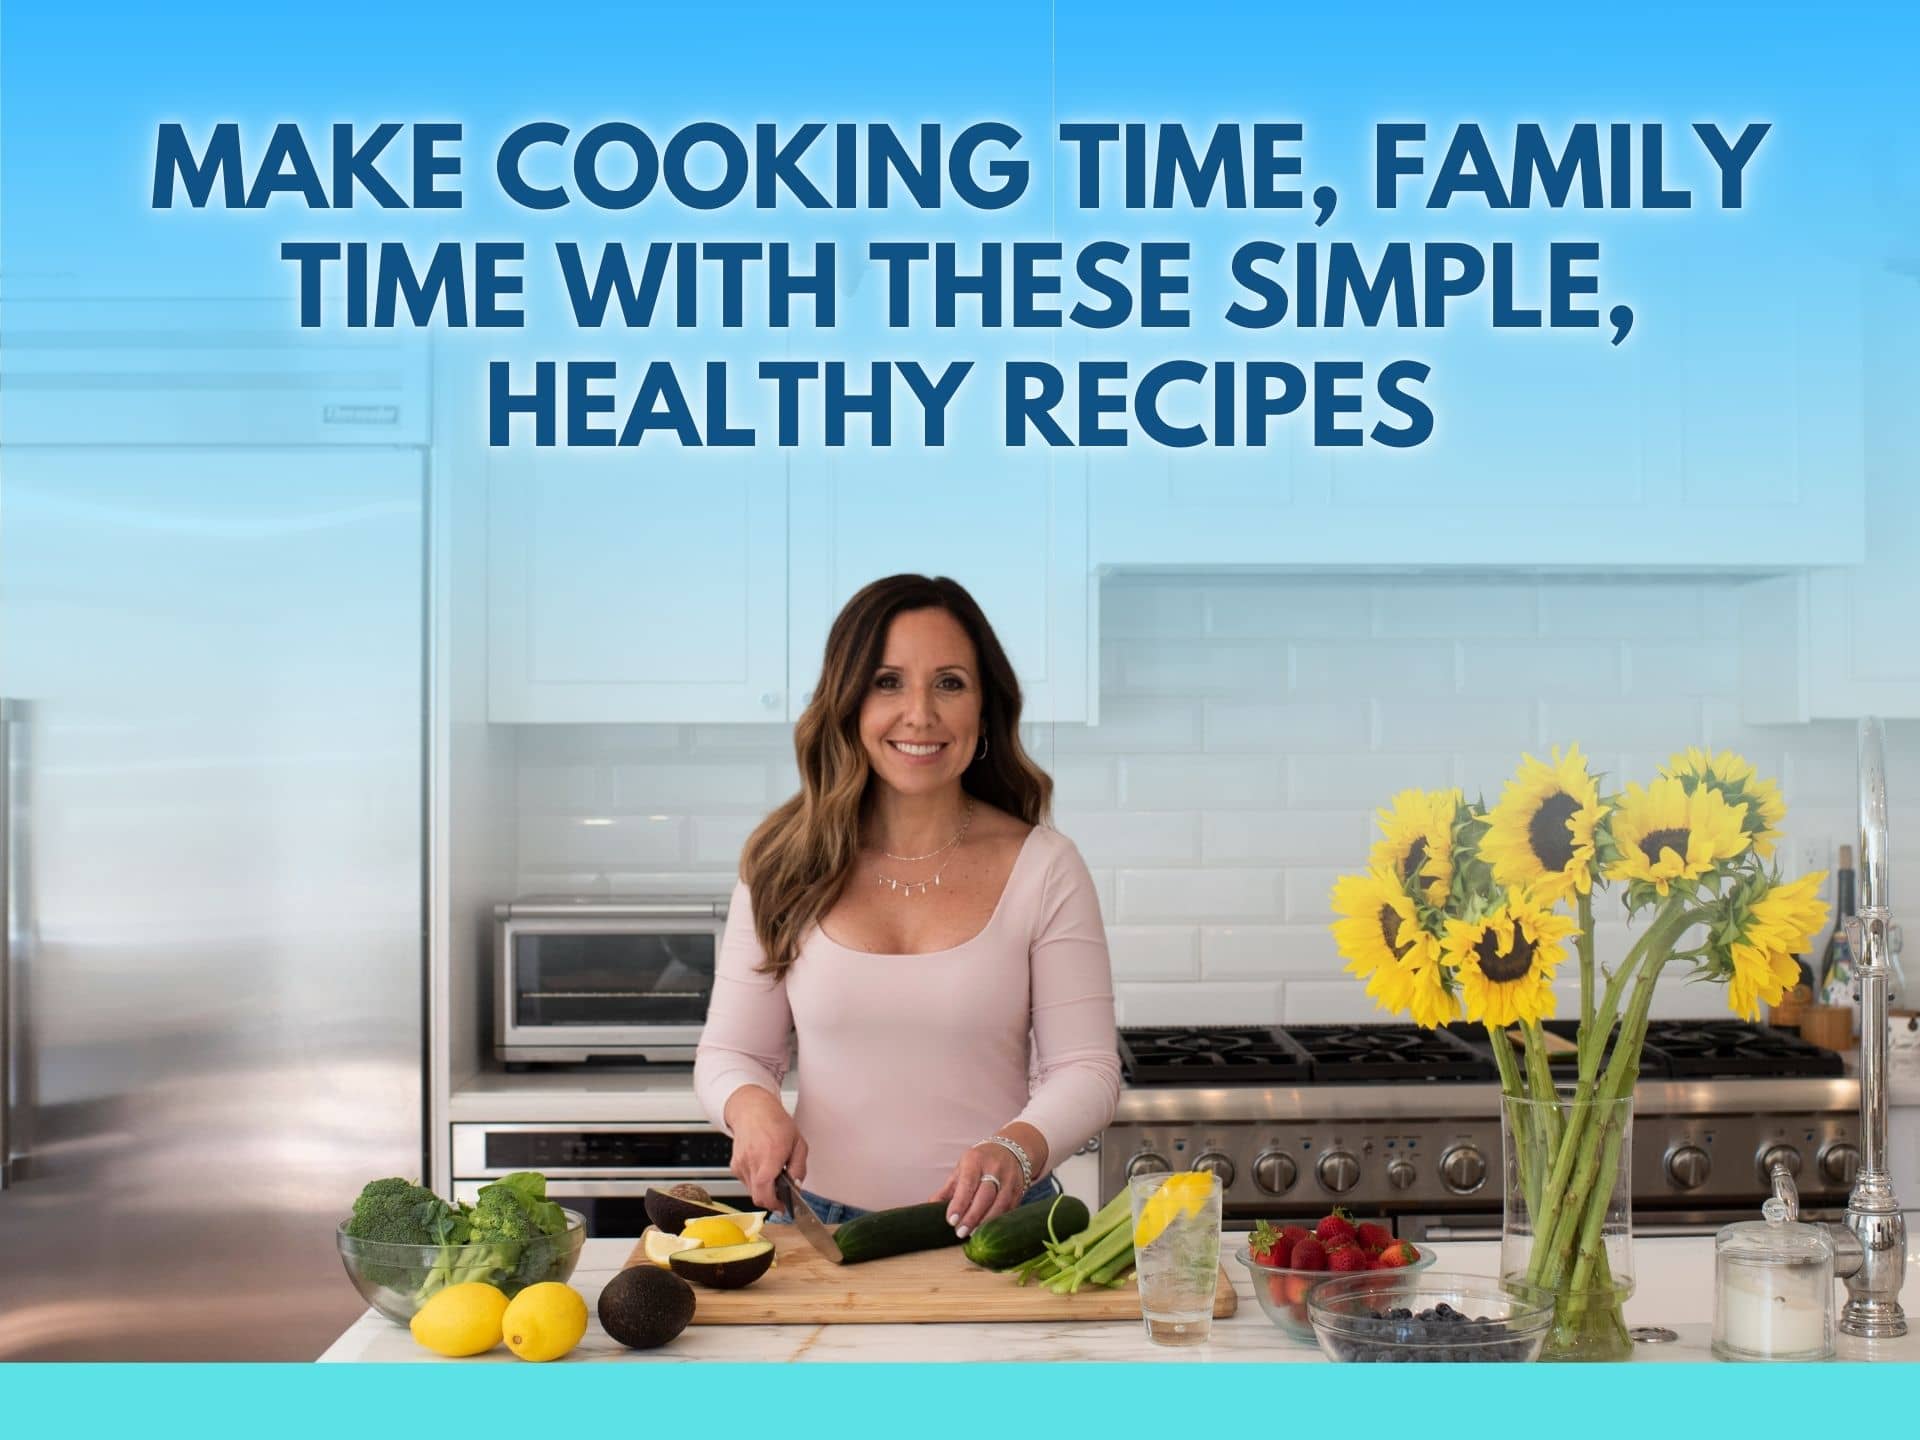 Make Cooking Time, Family Time with These Simple, Healthy Recipes